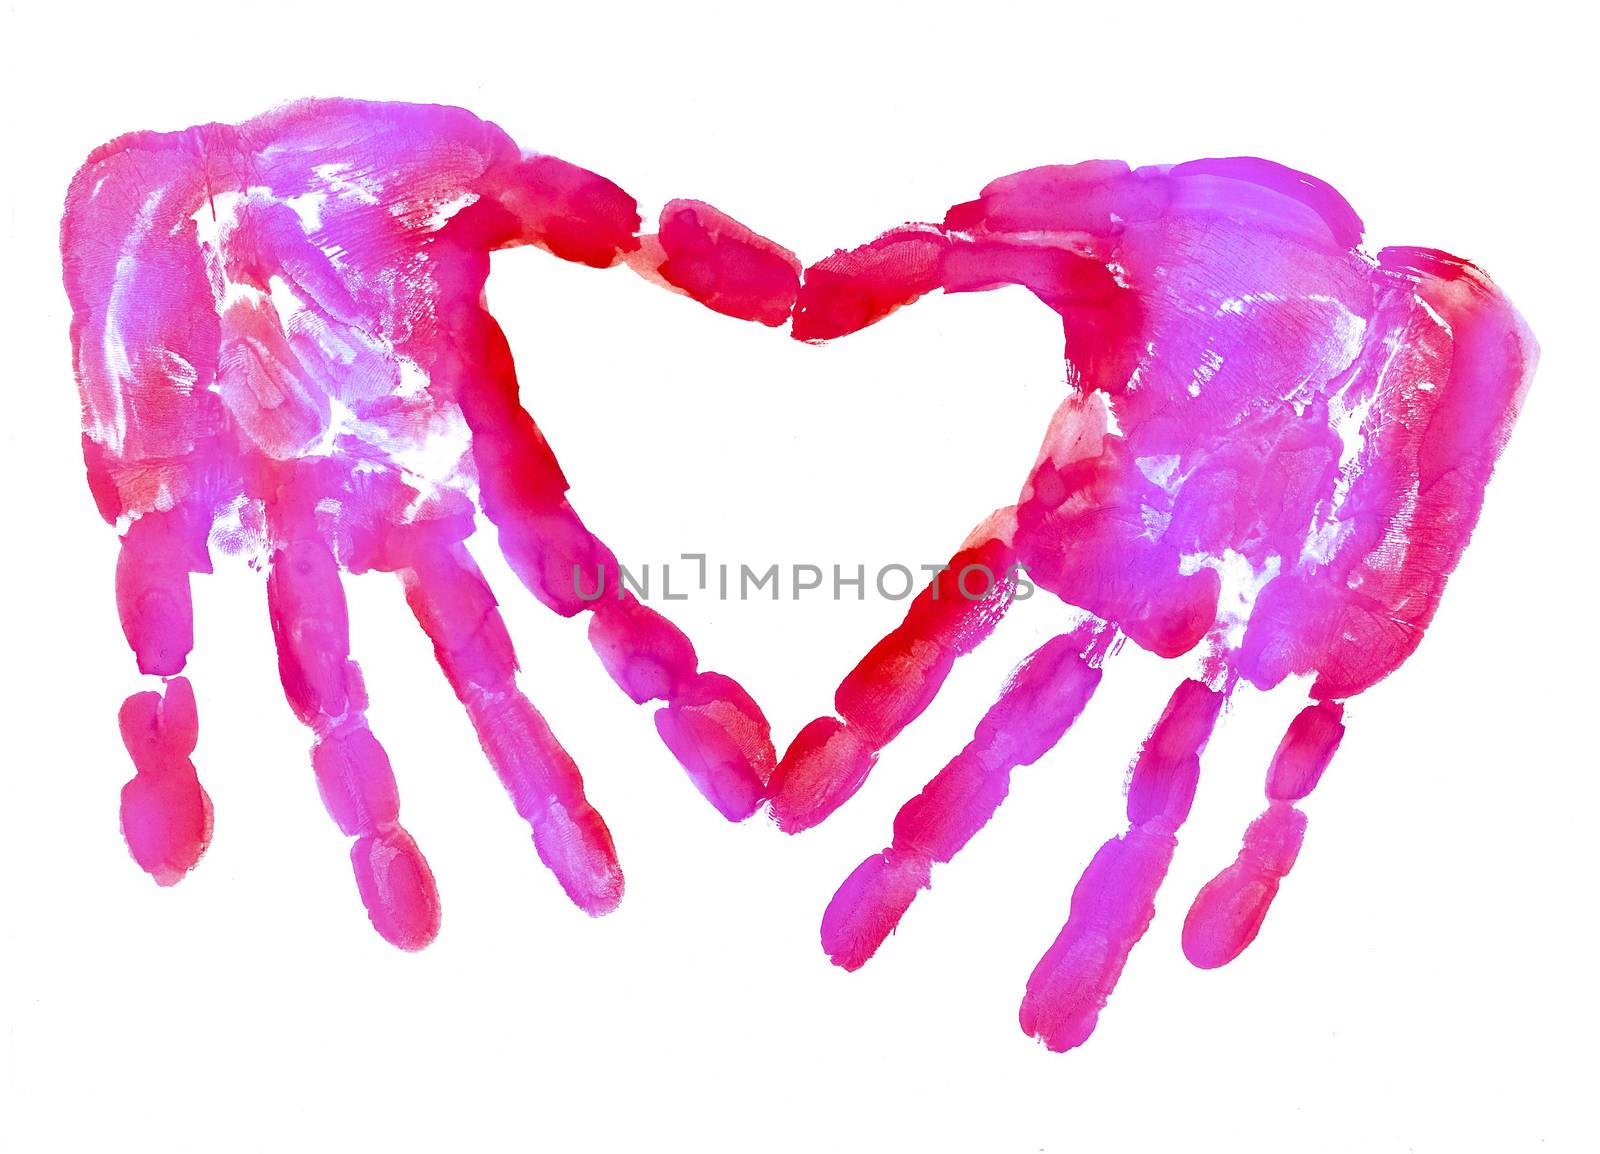 HandPrint in the form of Love